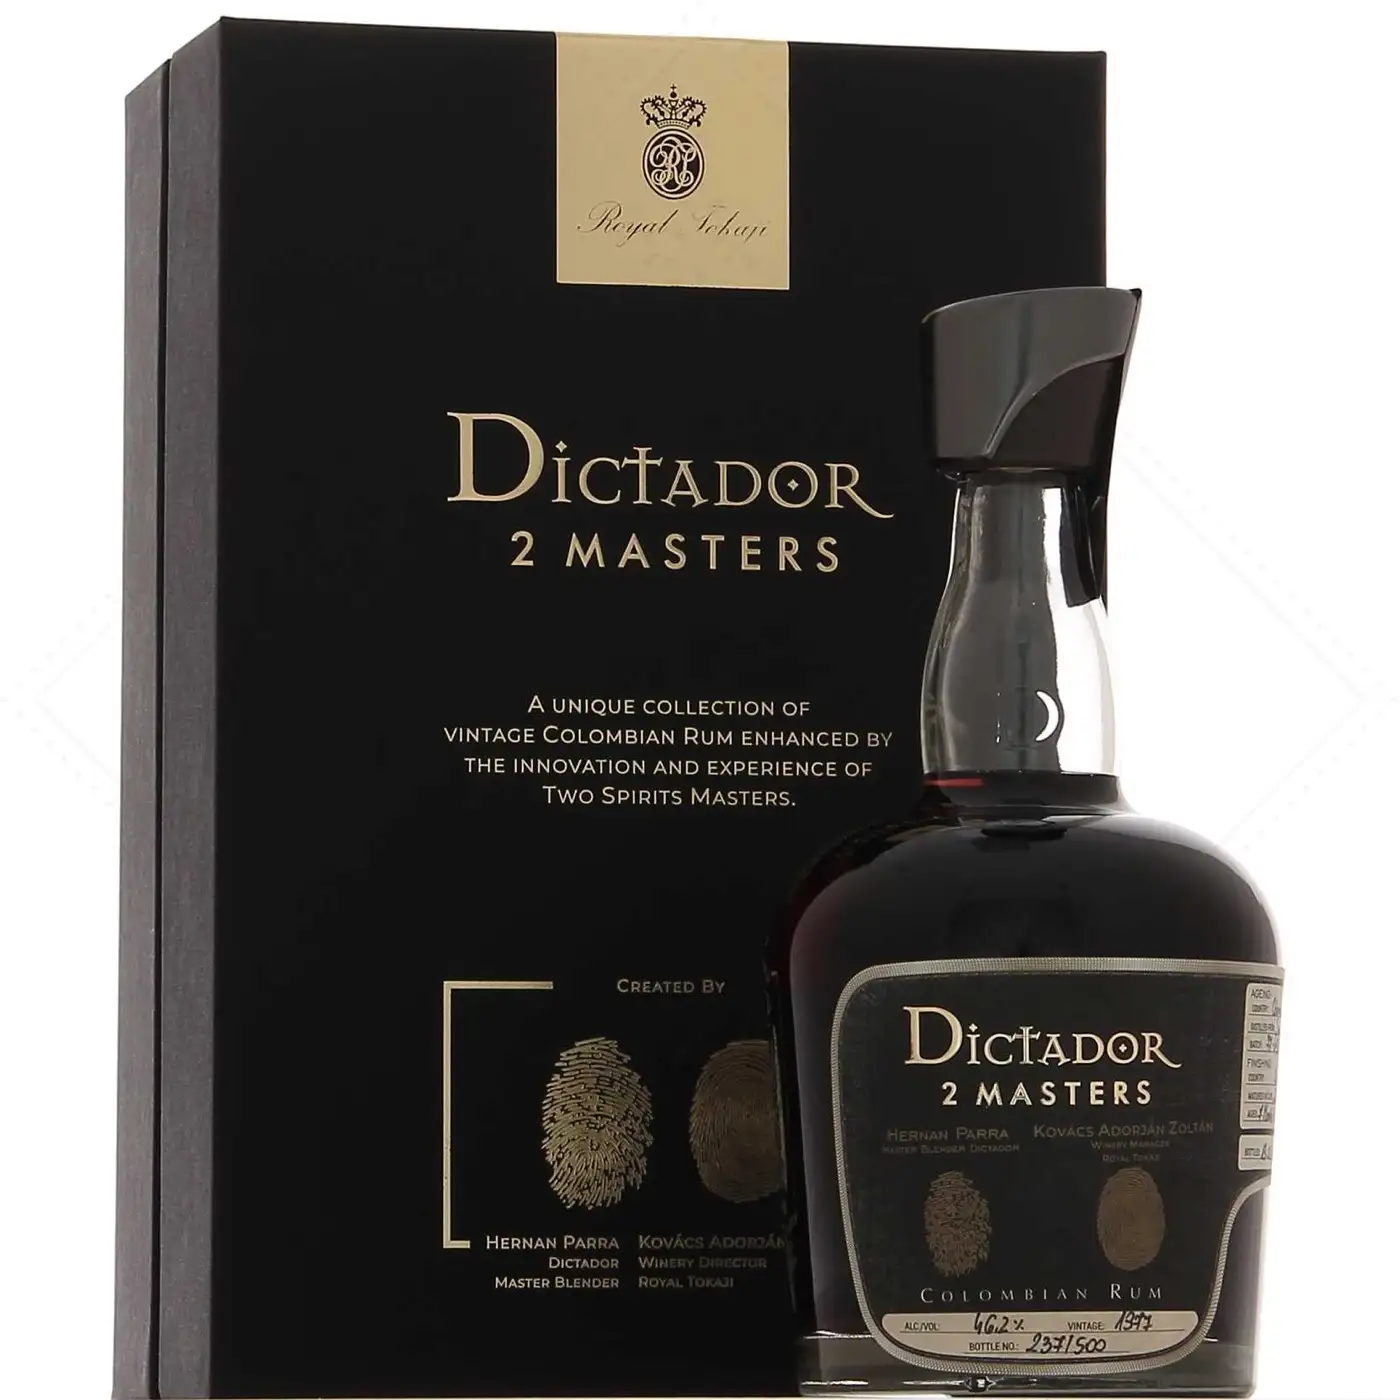 Image of the front of the bottle of the rum Dictador 2 Masters Royal Tokaji